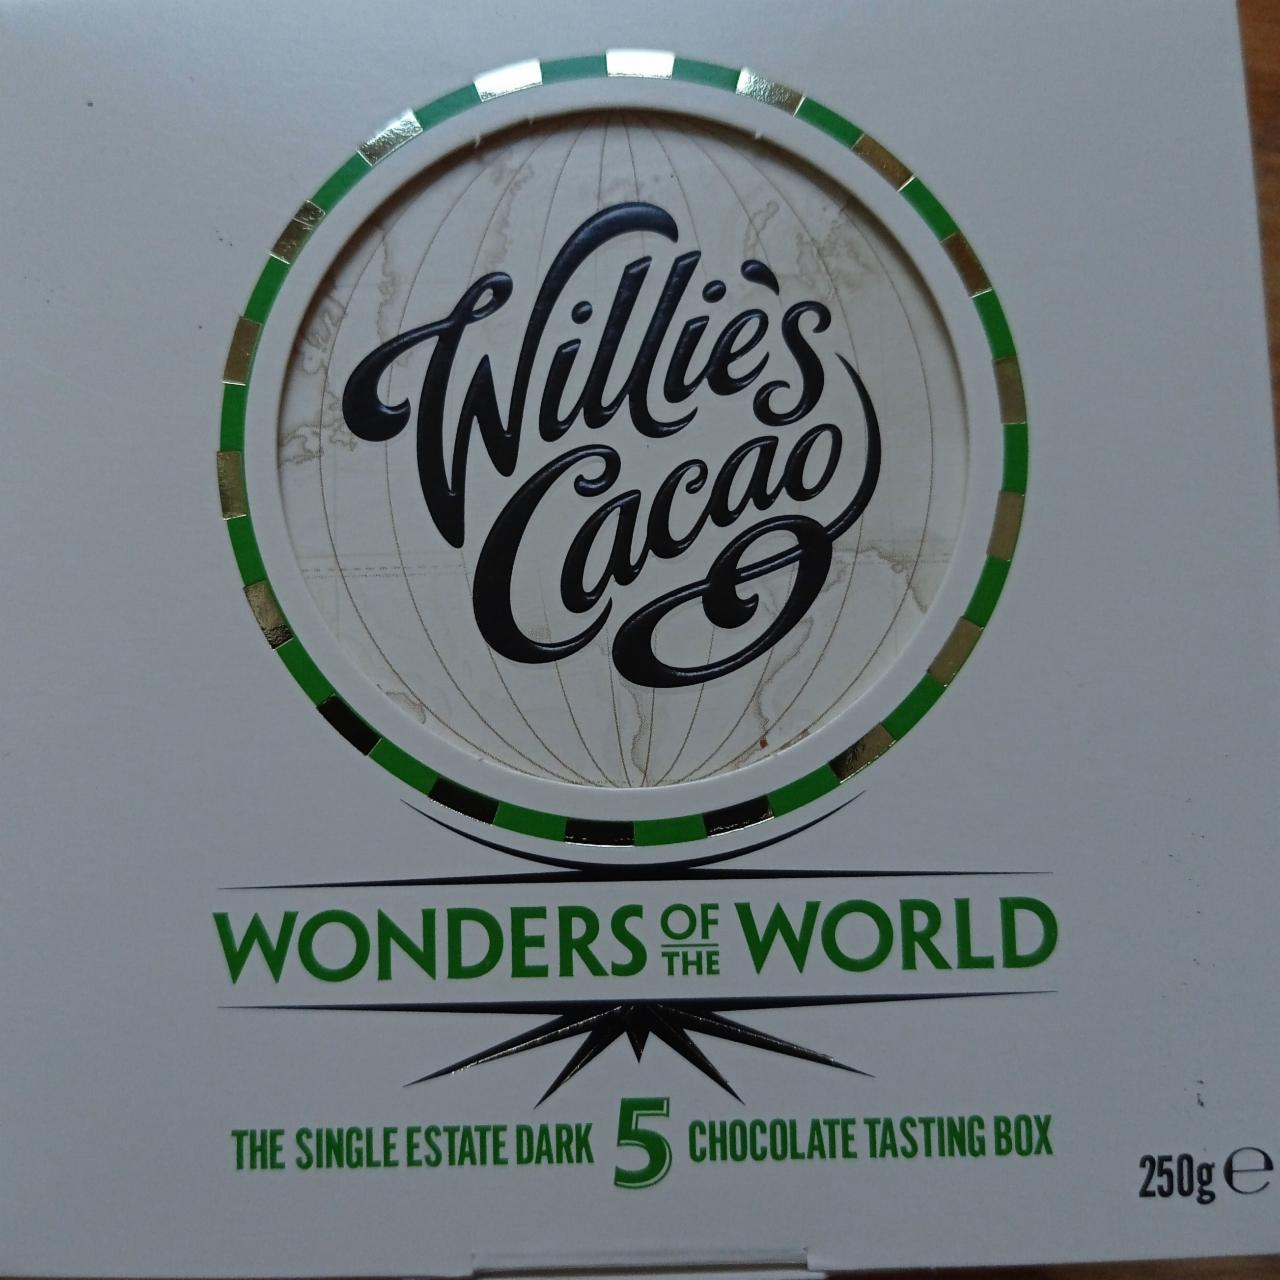 Fotografie - Wonders of the world 5 chocolate tasting box Willie's Cacao